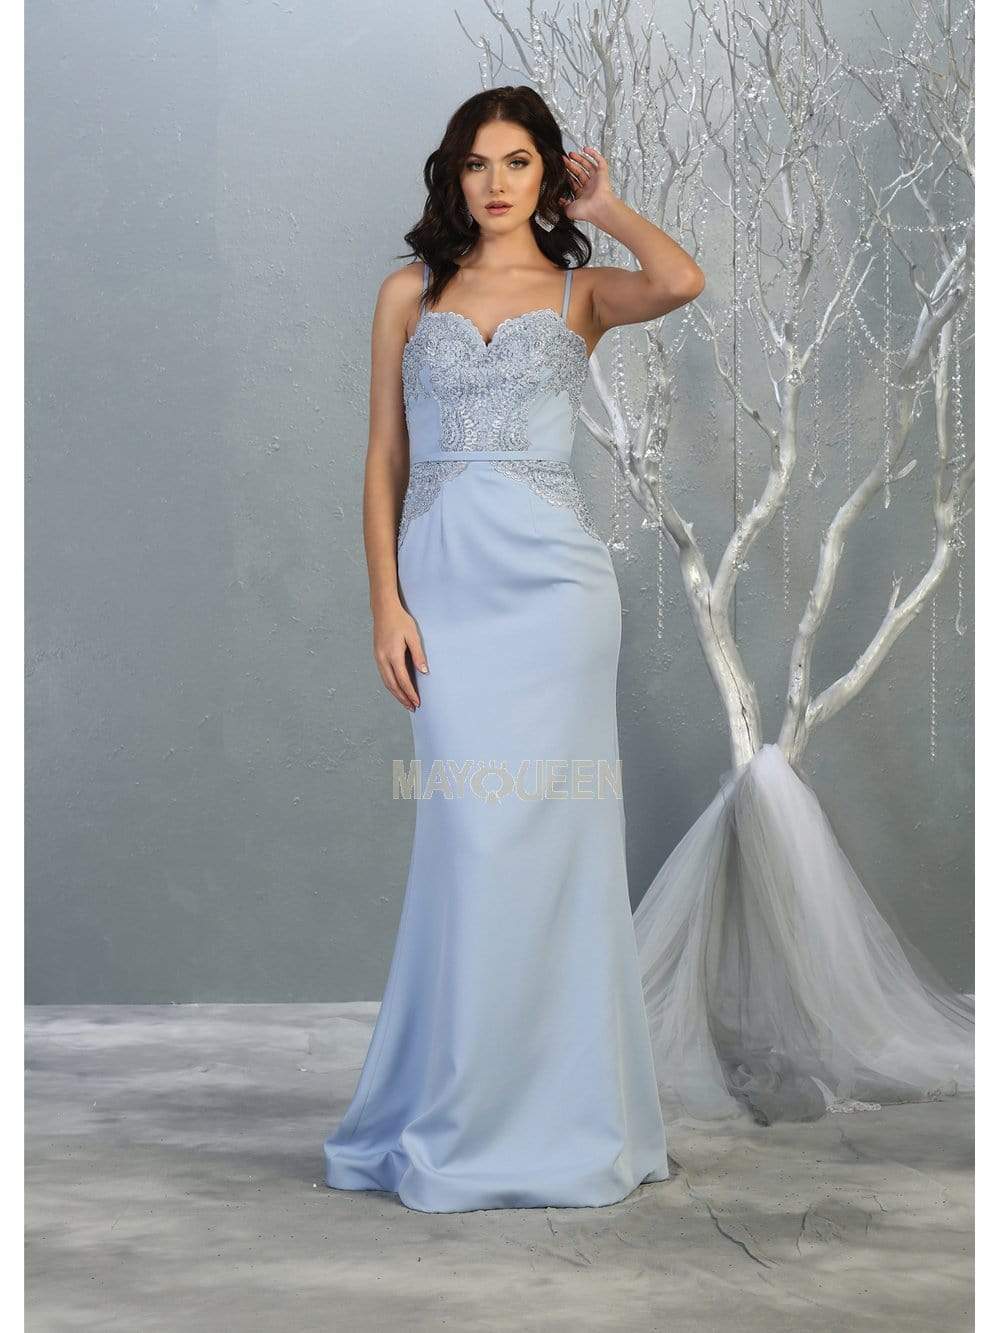 May Queen - MQ1759 Scallop Lace Appliqued Sweetheart Bodice Dress Prom Dresses 4 / Dusty Blue